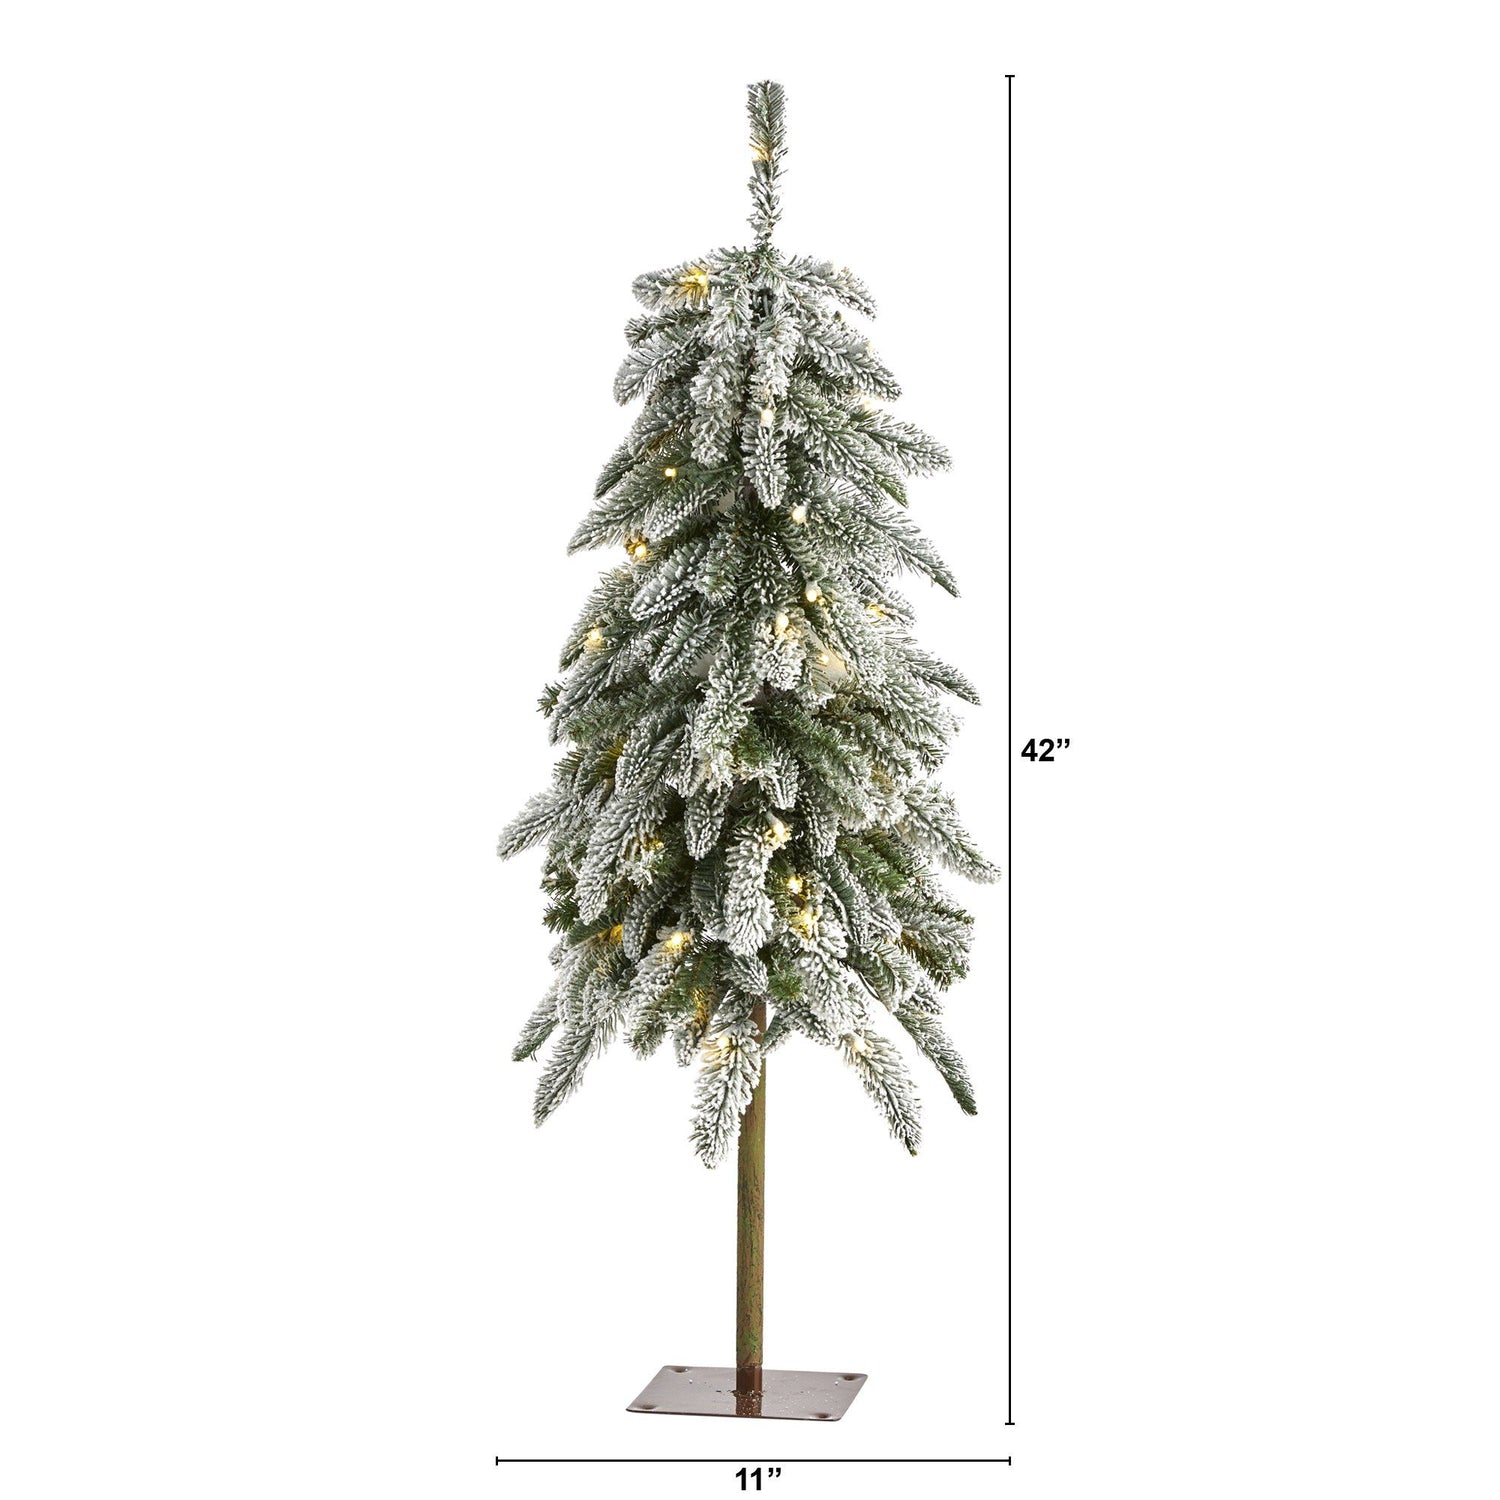 3.5’ Flocked Washington Alpine Christmas Tree with 50 White Warm LED lights and 168 Bendable Branches